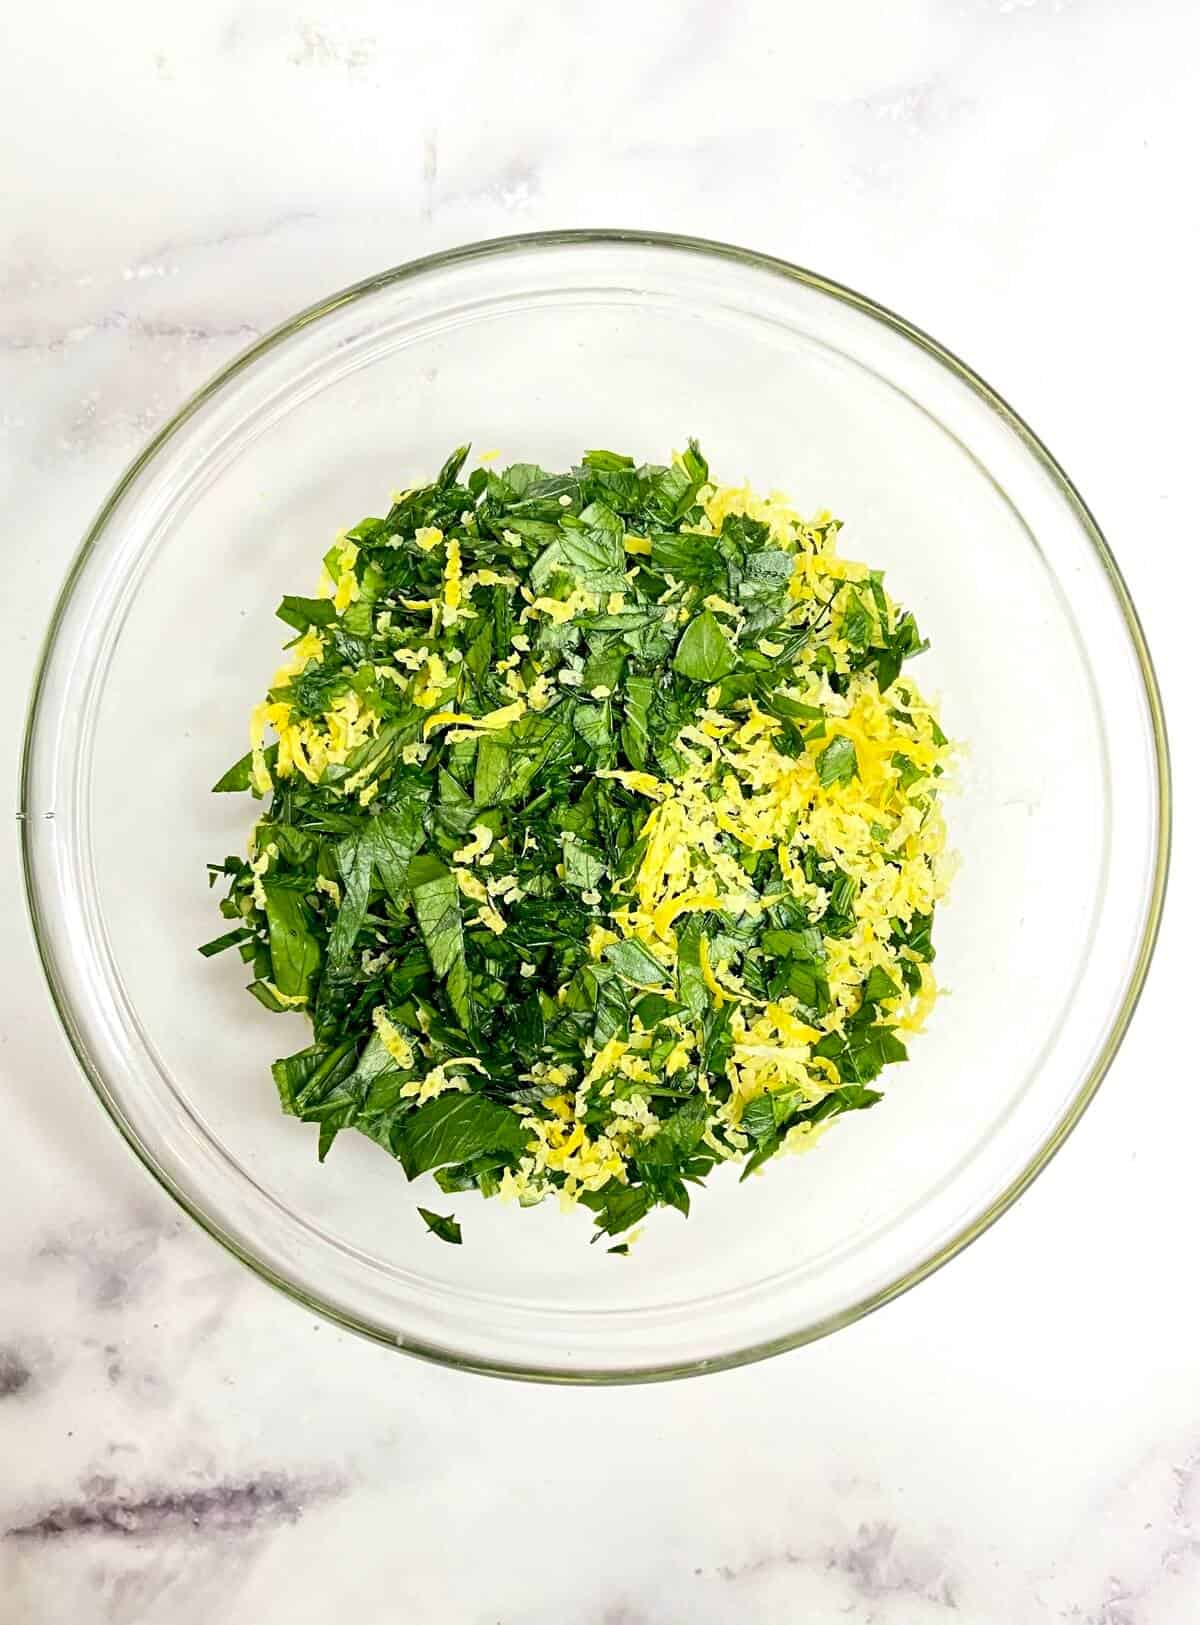 Chopped parsley and lemon zest in a glass bowl.